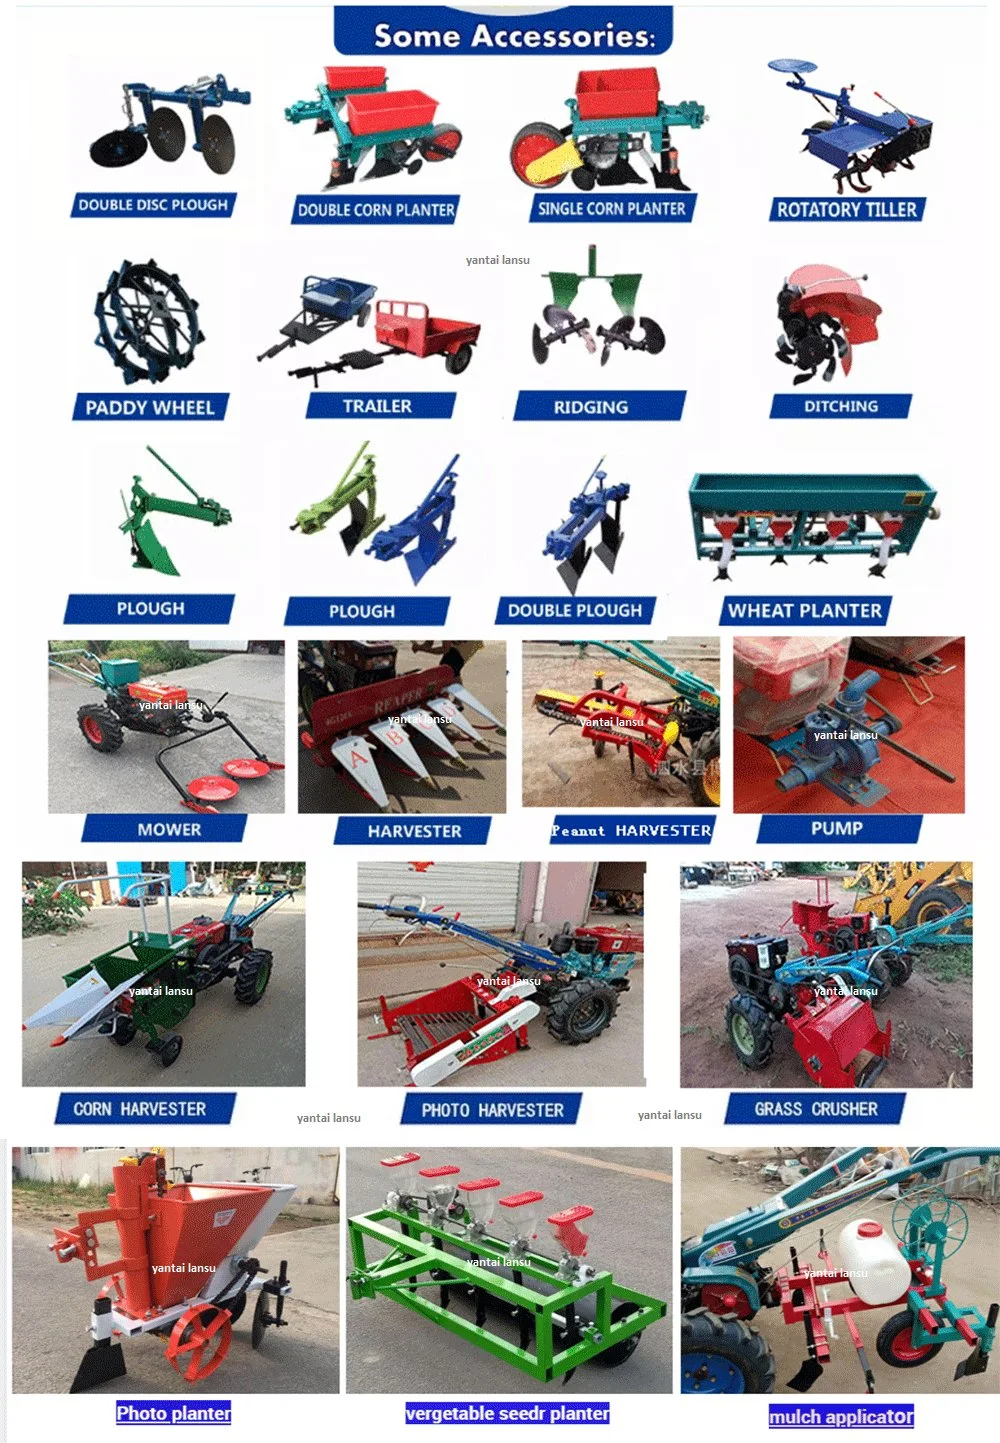 Factory Directly Supply Sale High Quality Water Cooled Diesel Two Wheel Walking Tractor